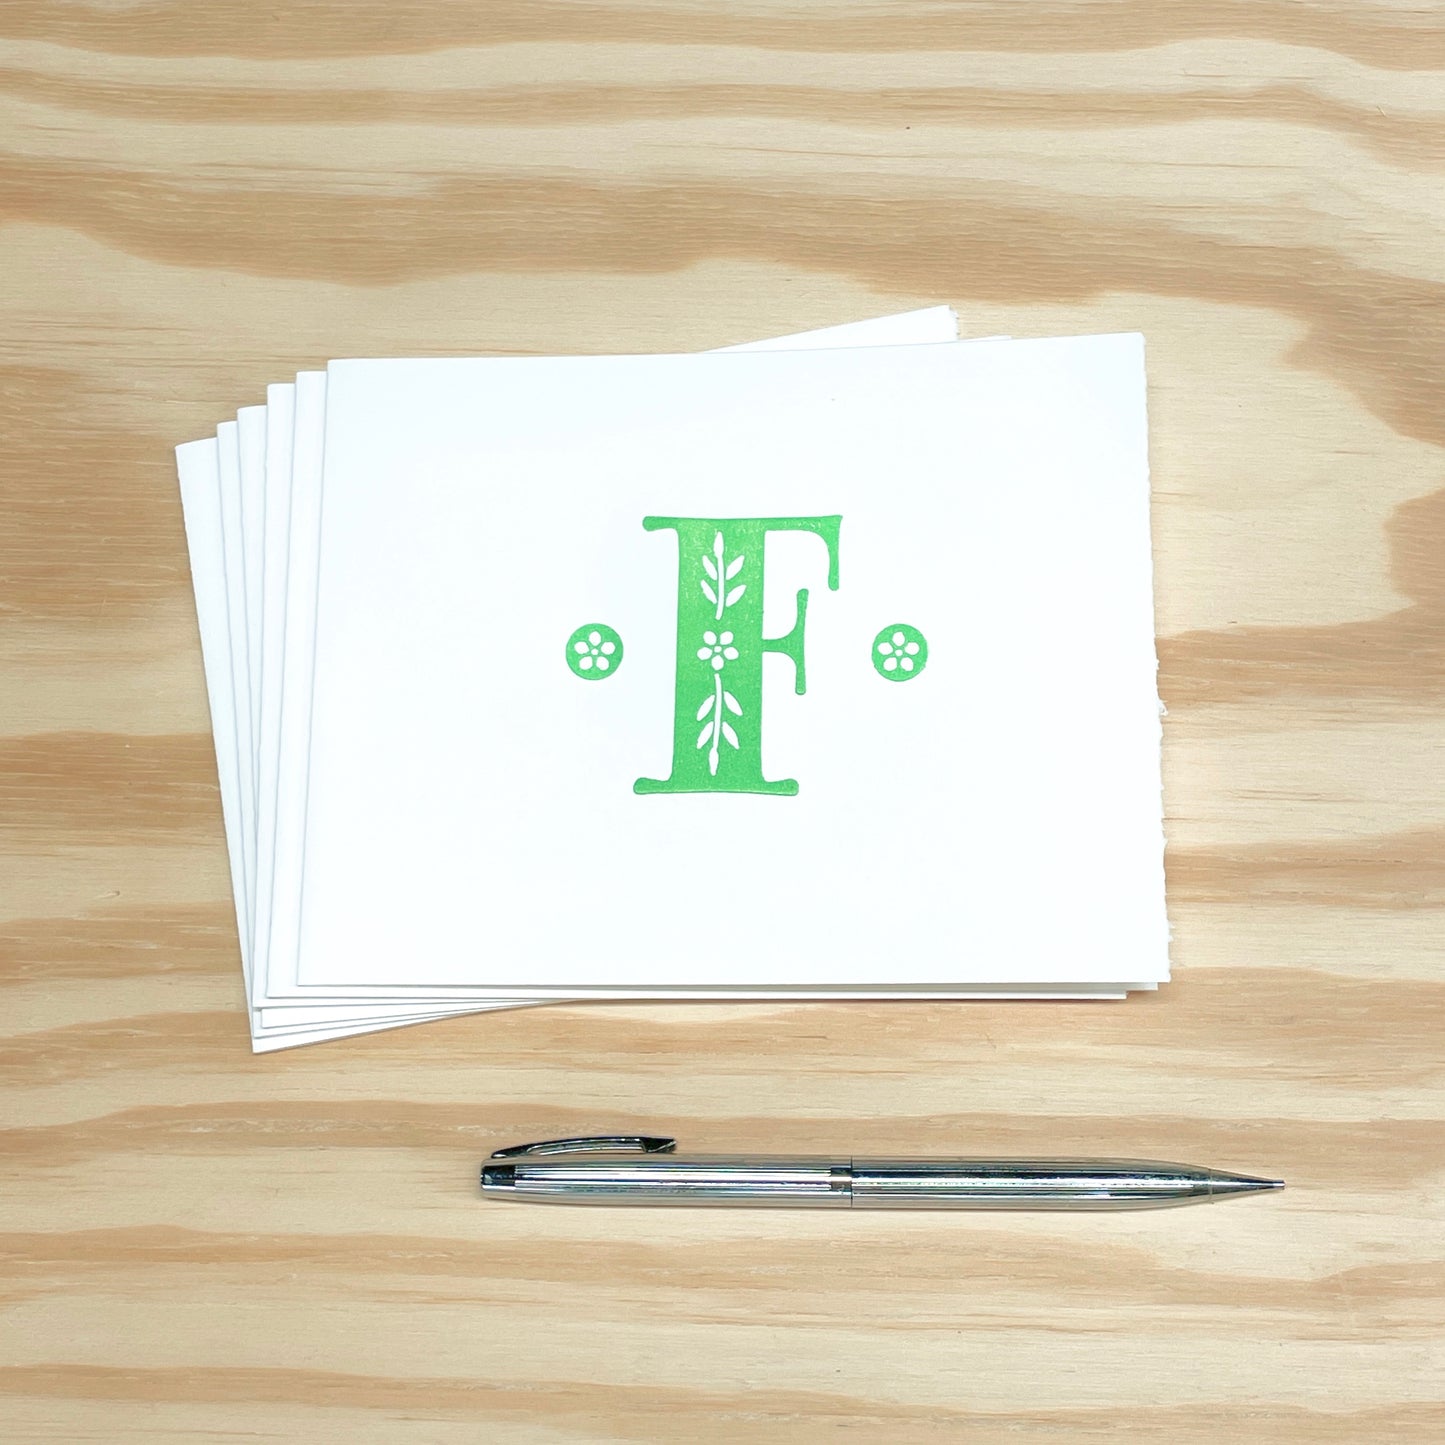 Monogram Leafy Letters 6-pack cards - Choose Your Letter - wood type letterpress printed